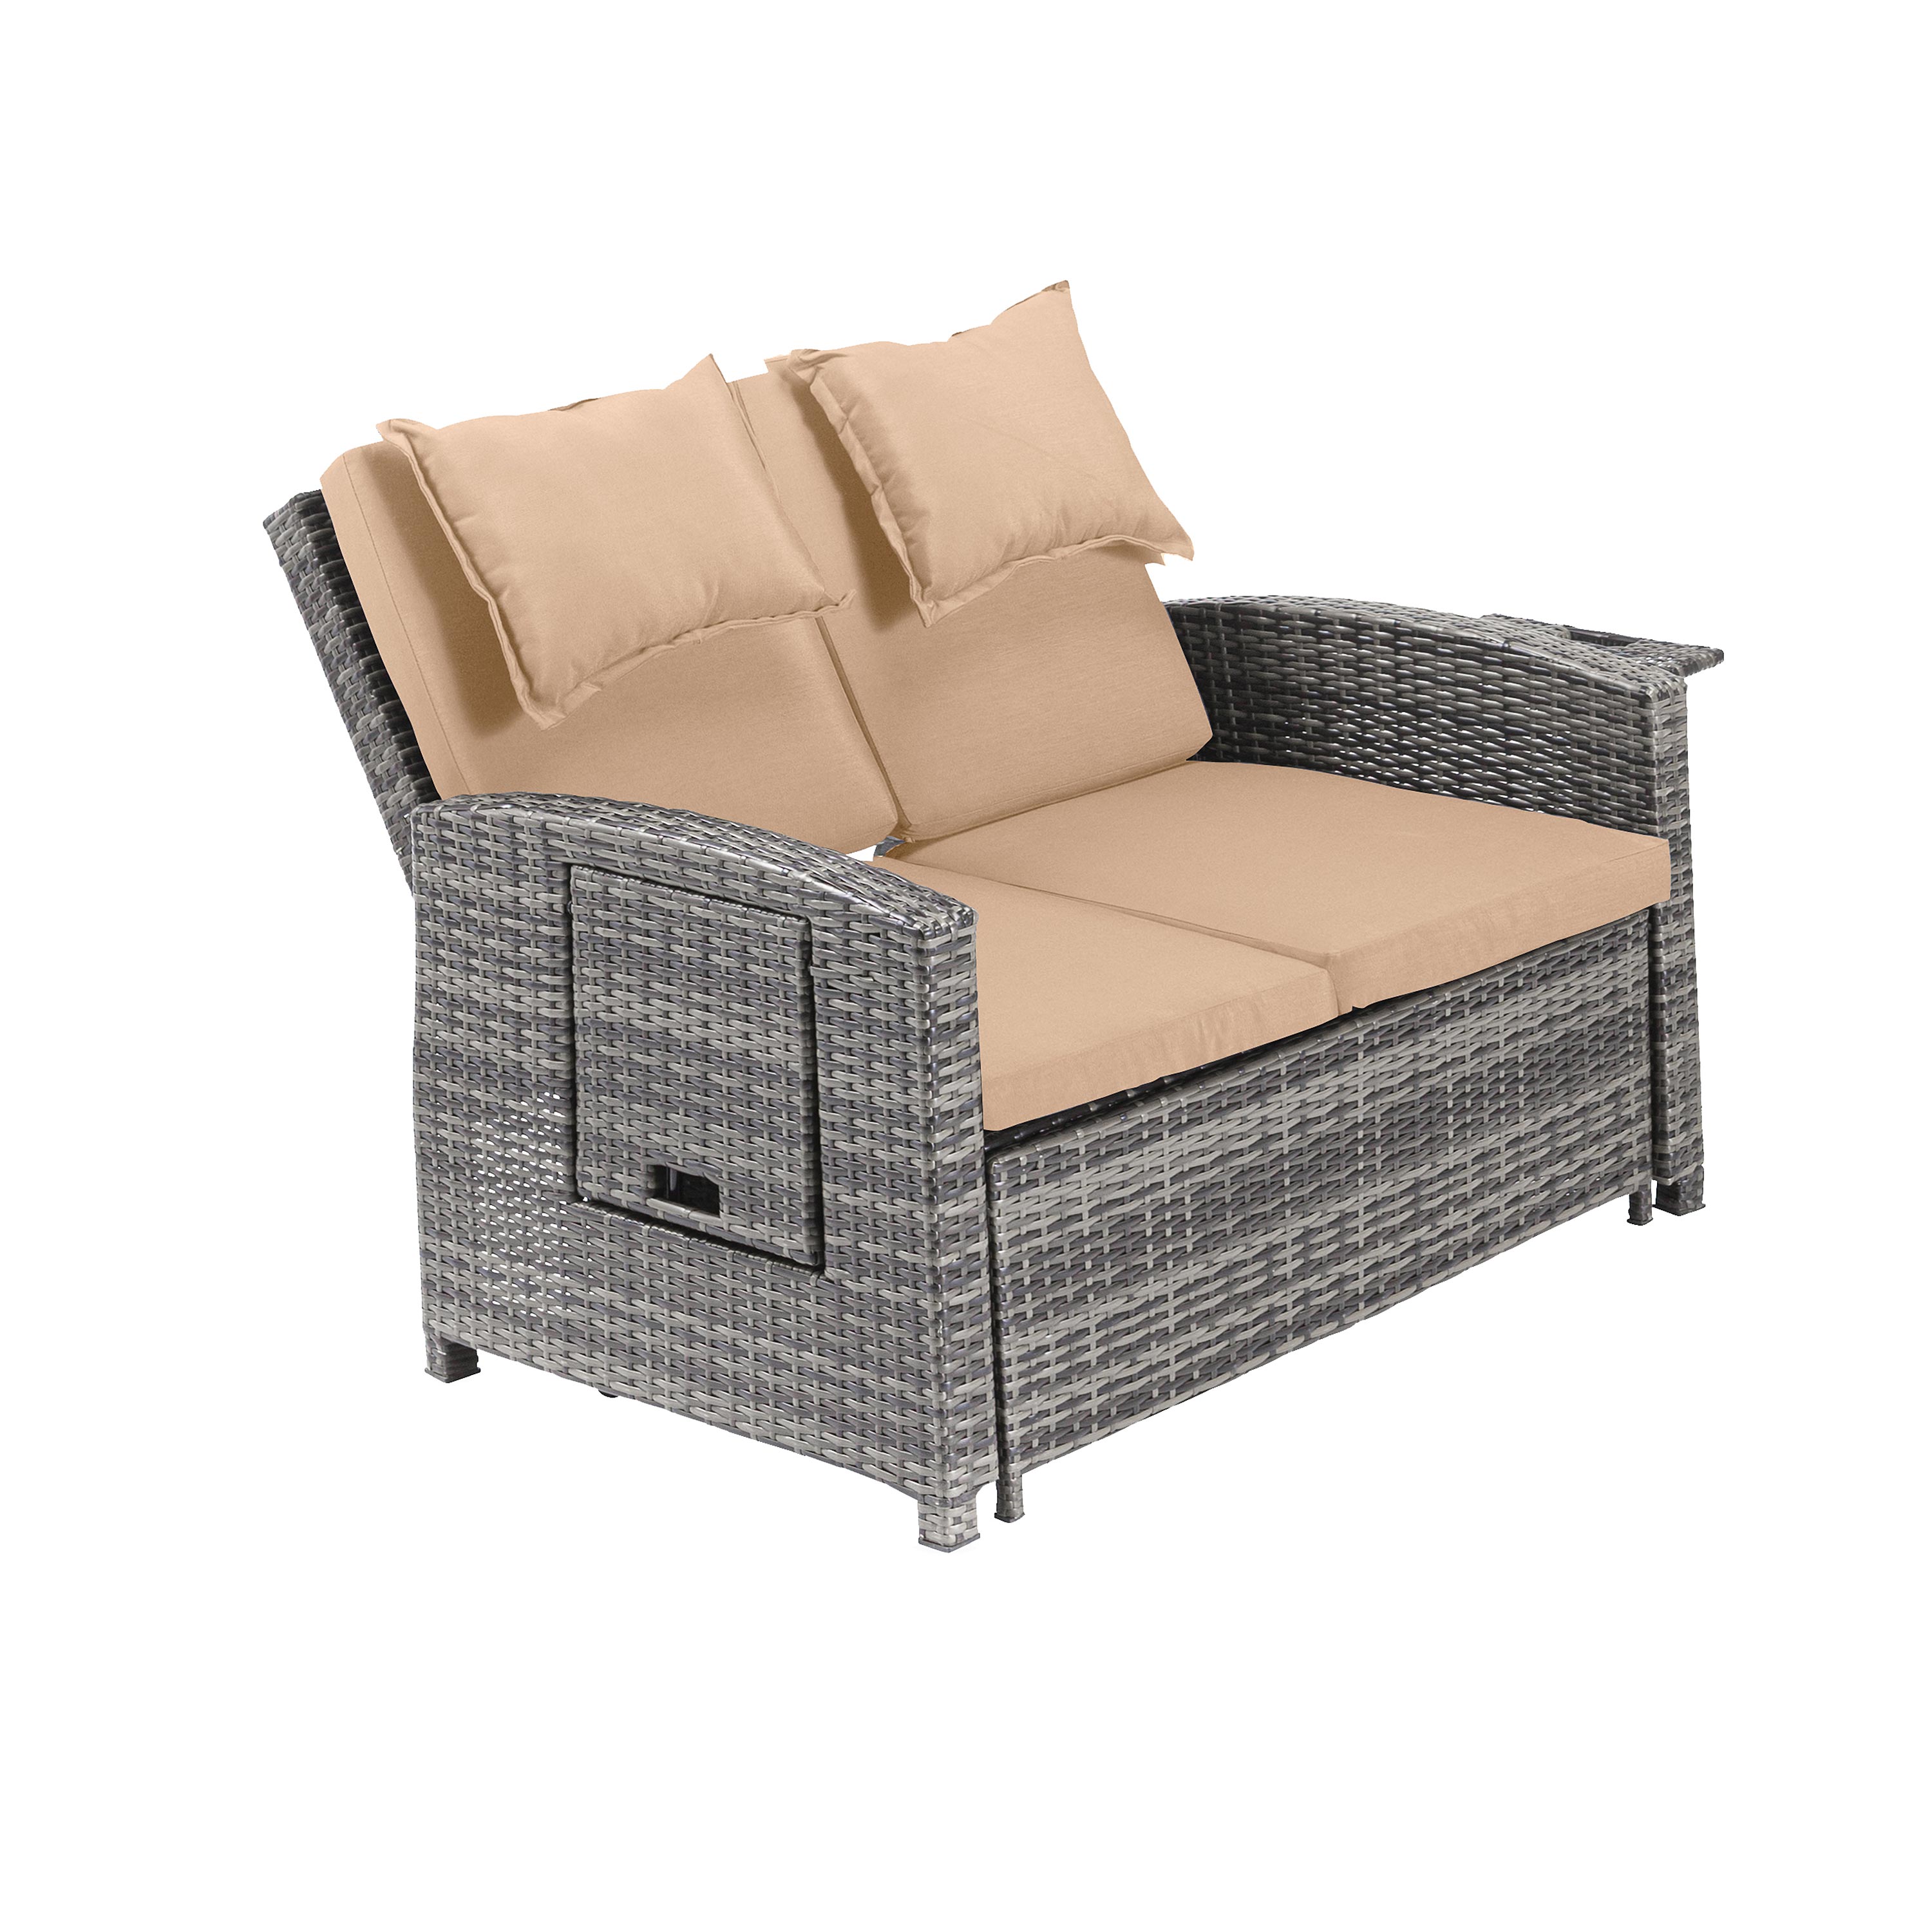 Multi-Functional Outdoor Wicker Love Seat Chaise Lounger with Taupe Cushions